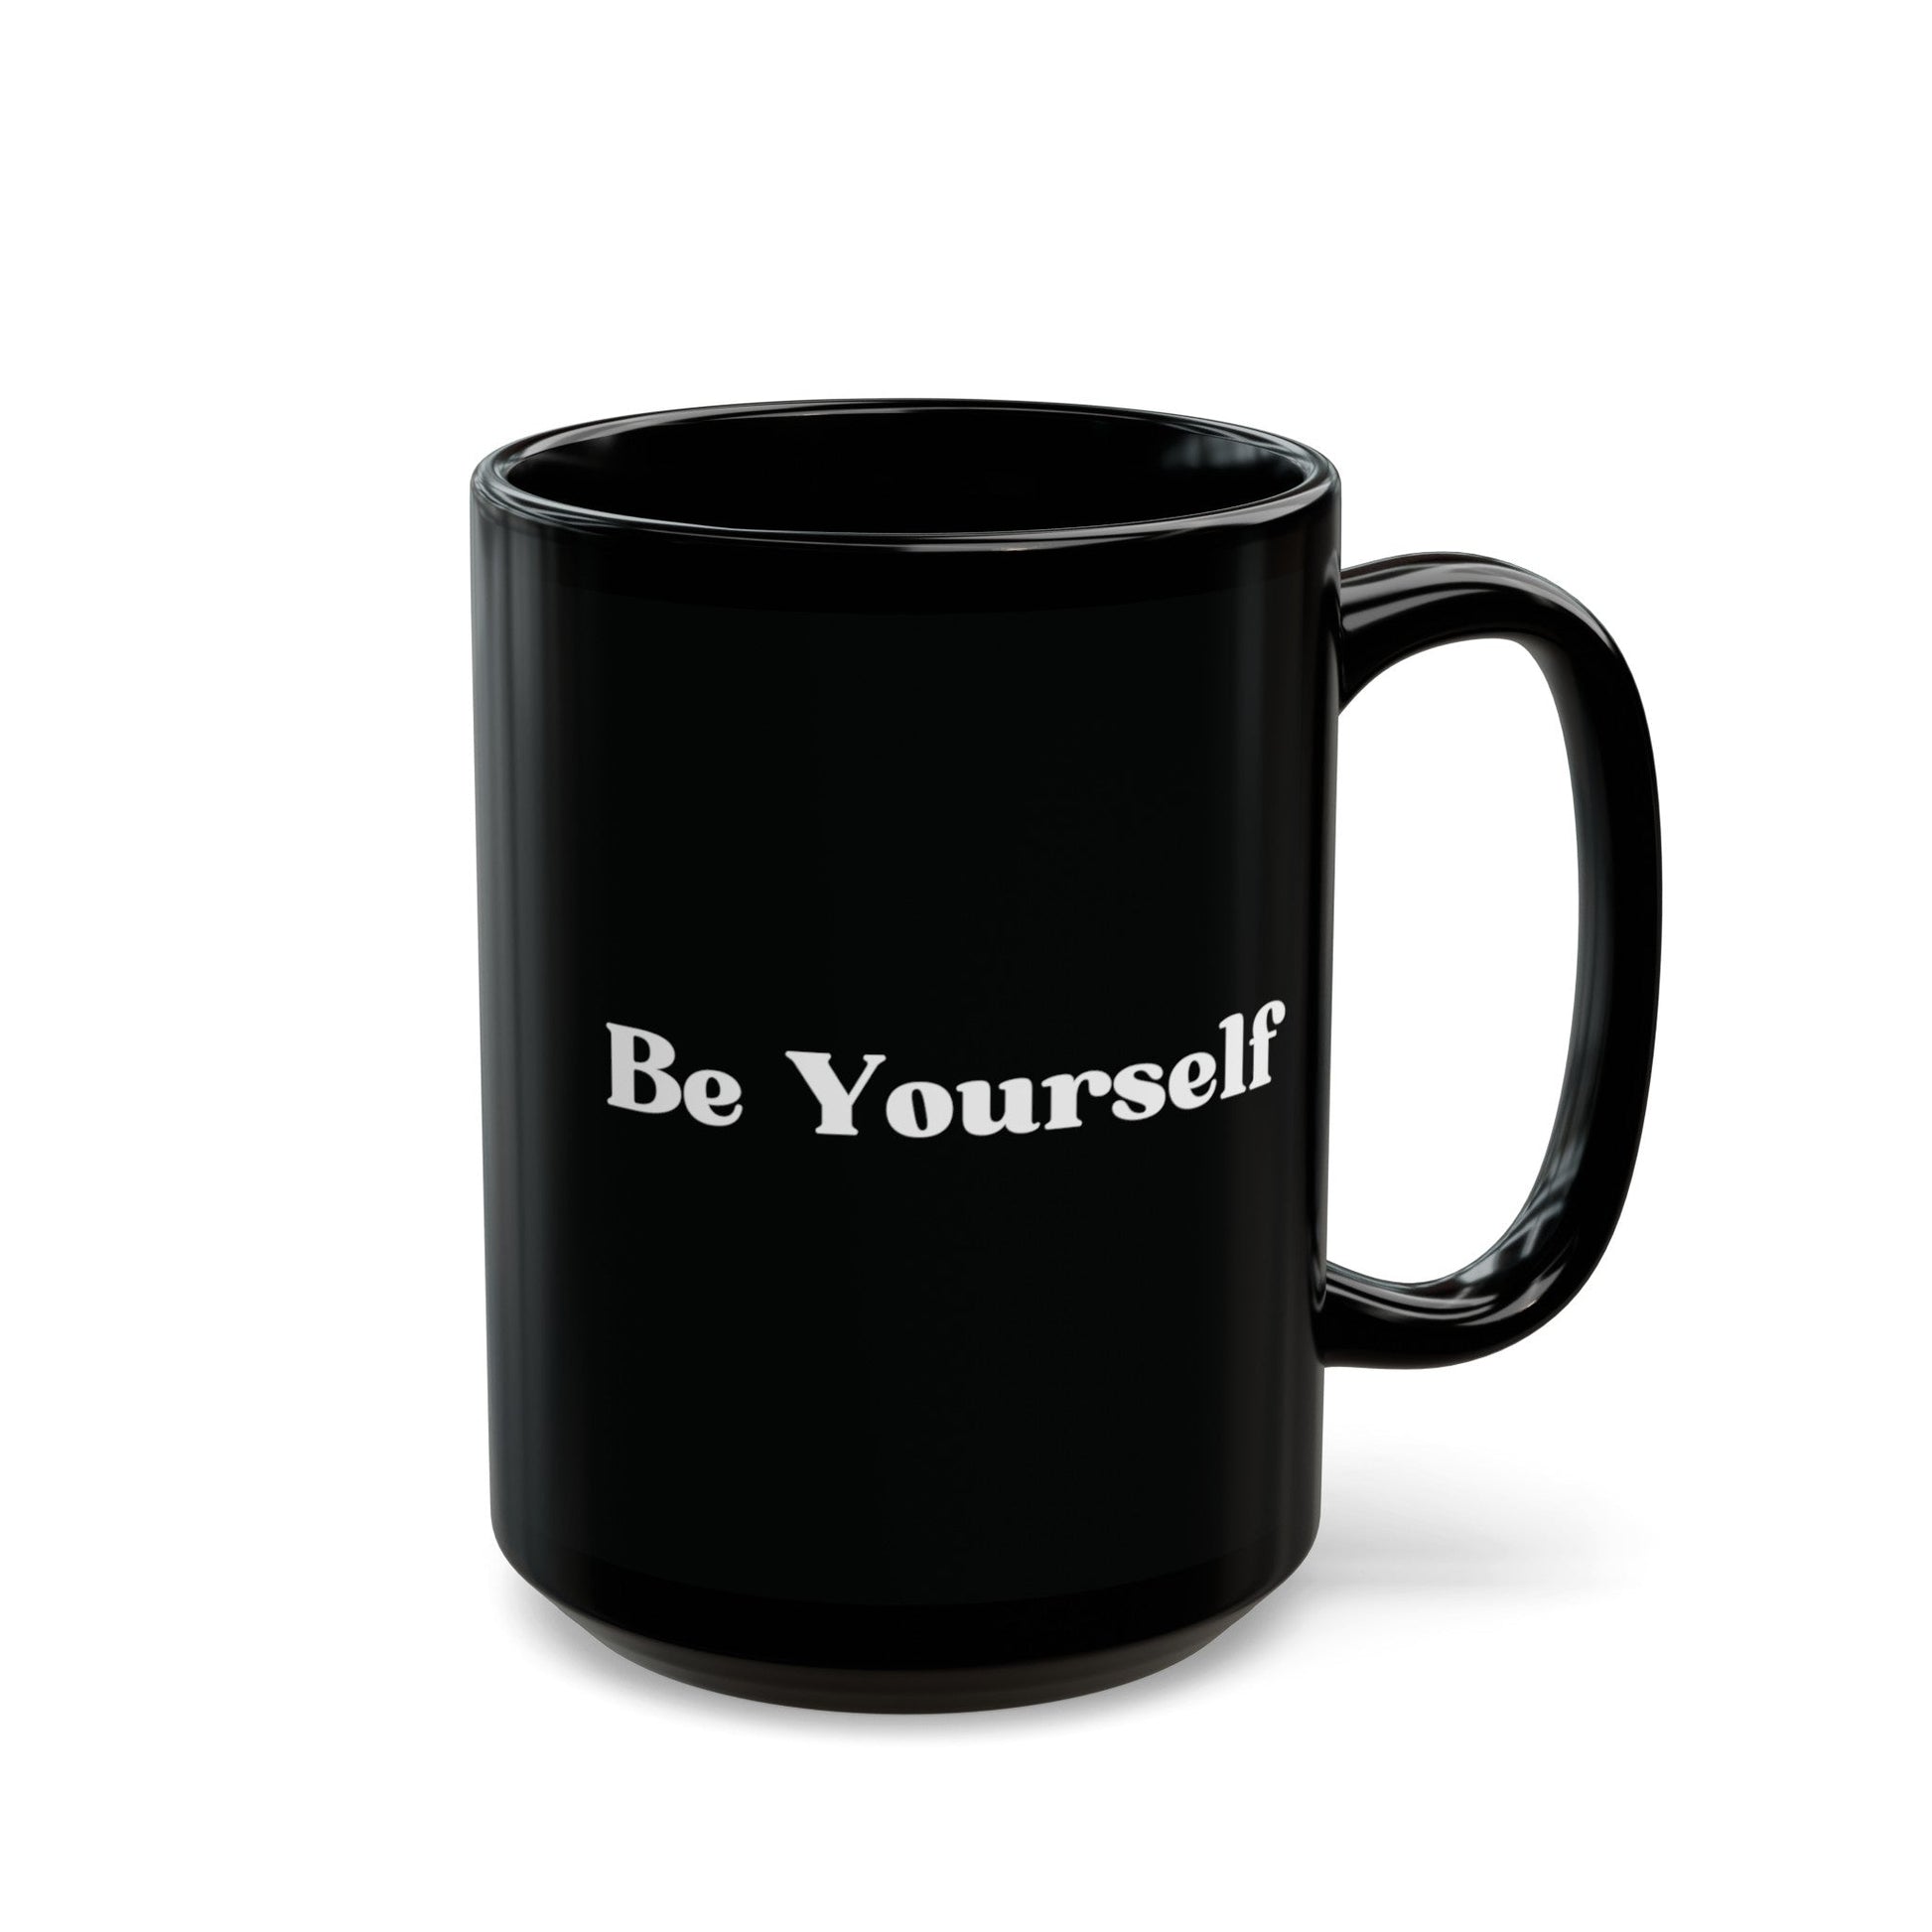 Be Yourself | Inspirational Cup, Video Game Coffee Cup, Office Or Geek Gift | Black Coffee Mug (11/15oz) - Moikas